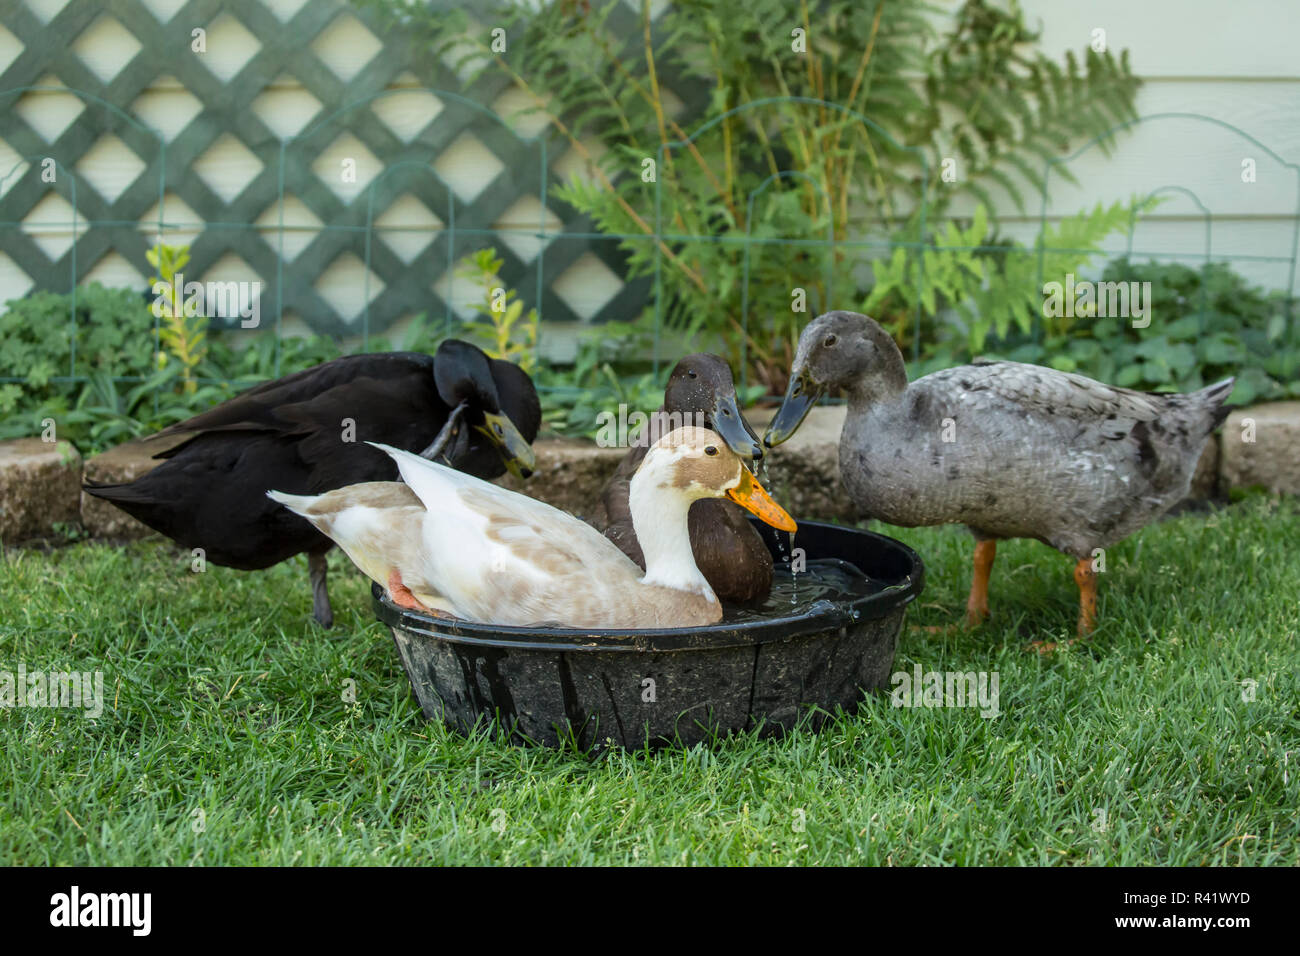 Leavenworth, Washington State, USA. Four types of Indian Runner ducks: White and Fawn, black, chocolate and blue. (PR) Stock Photo